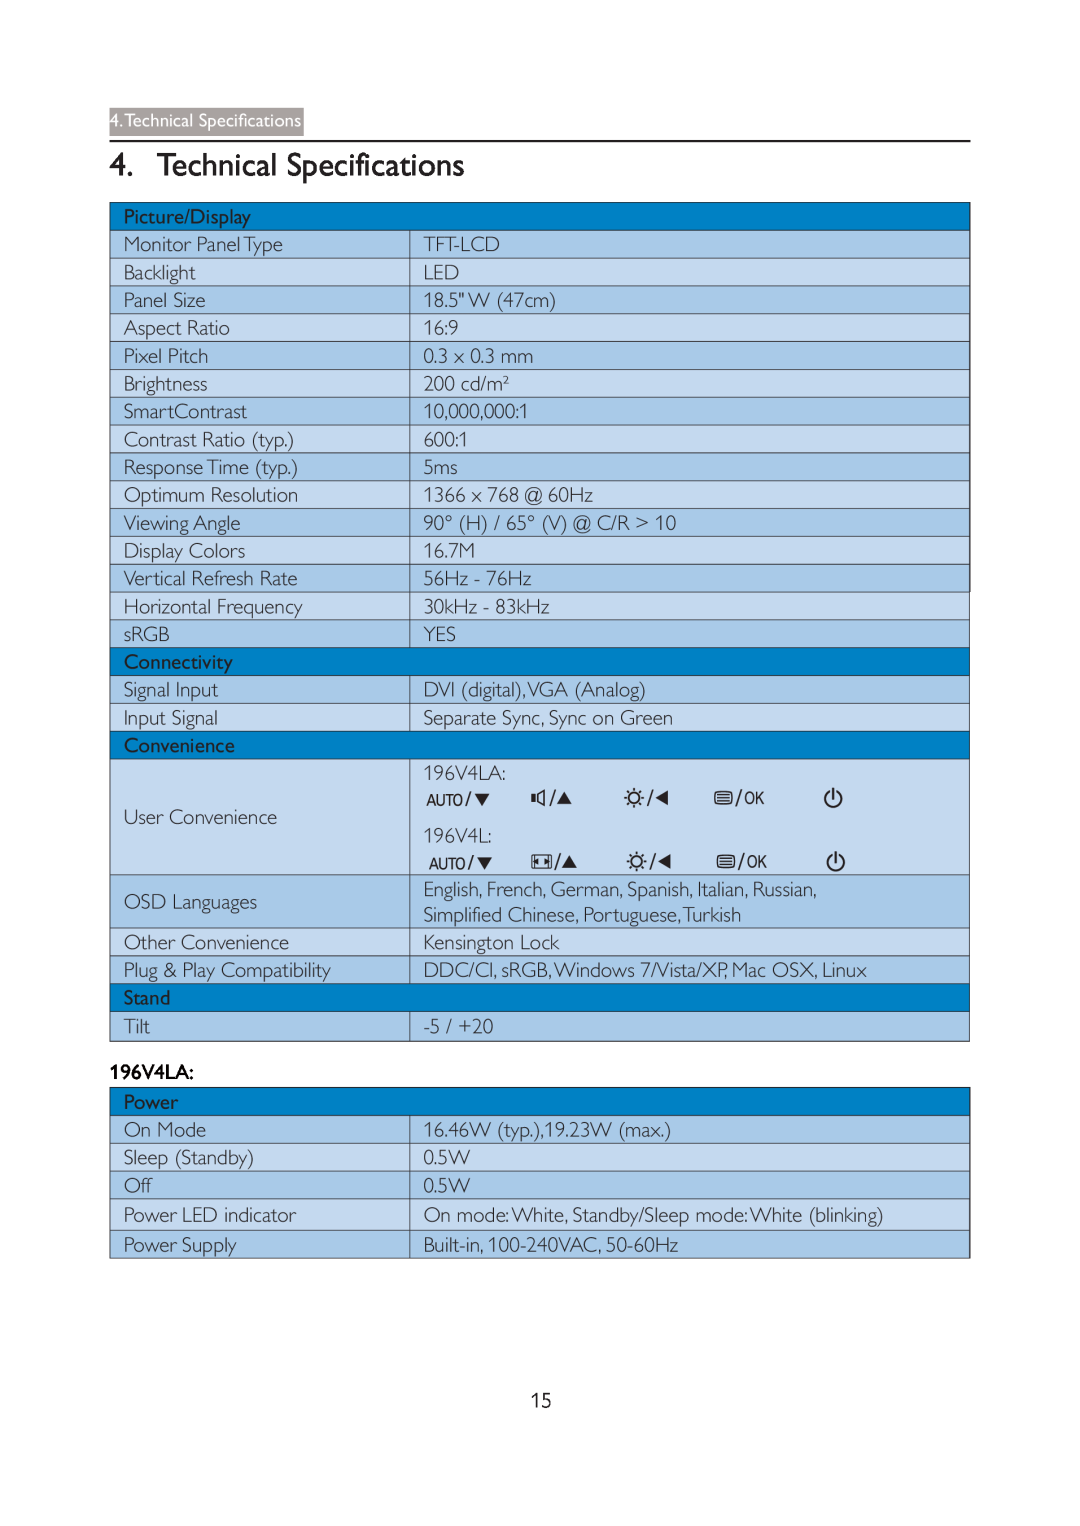 Philips user manual Technical Specifications, 196V4LA 